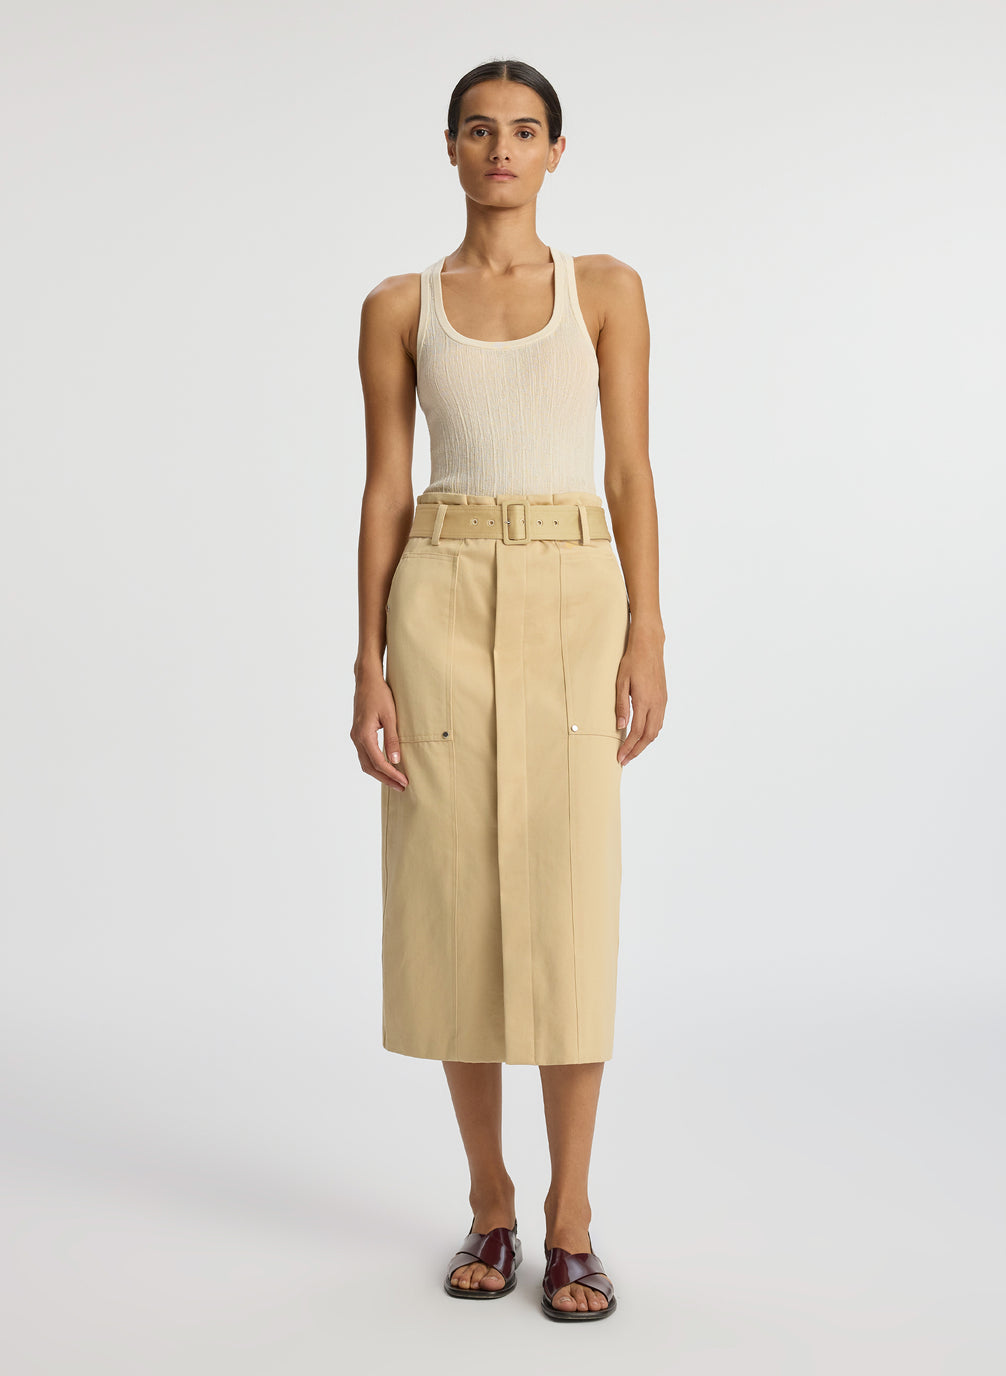 front view of woman wearing beige tank top and tan midi skirt